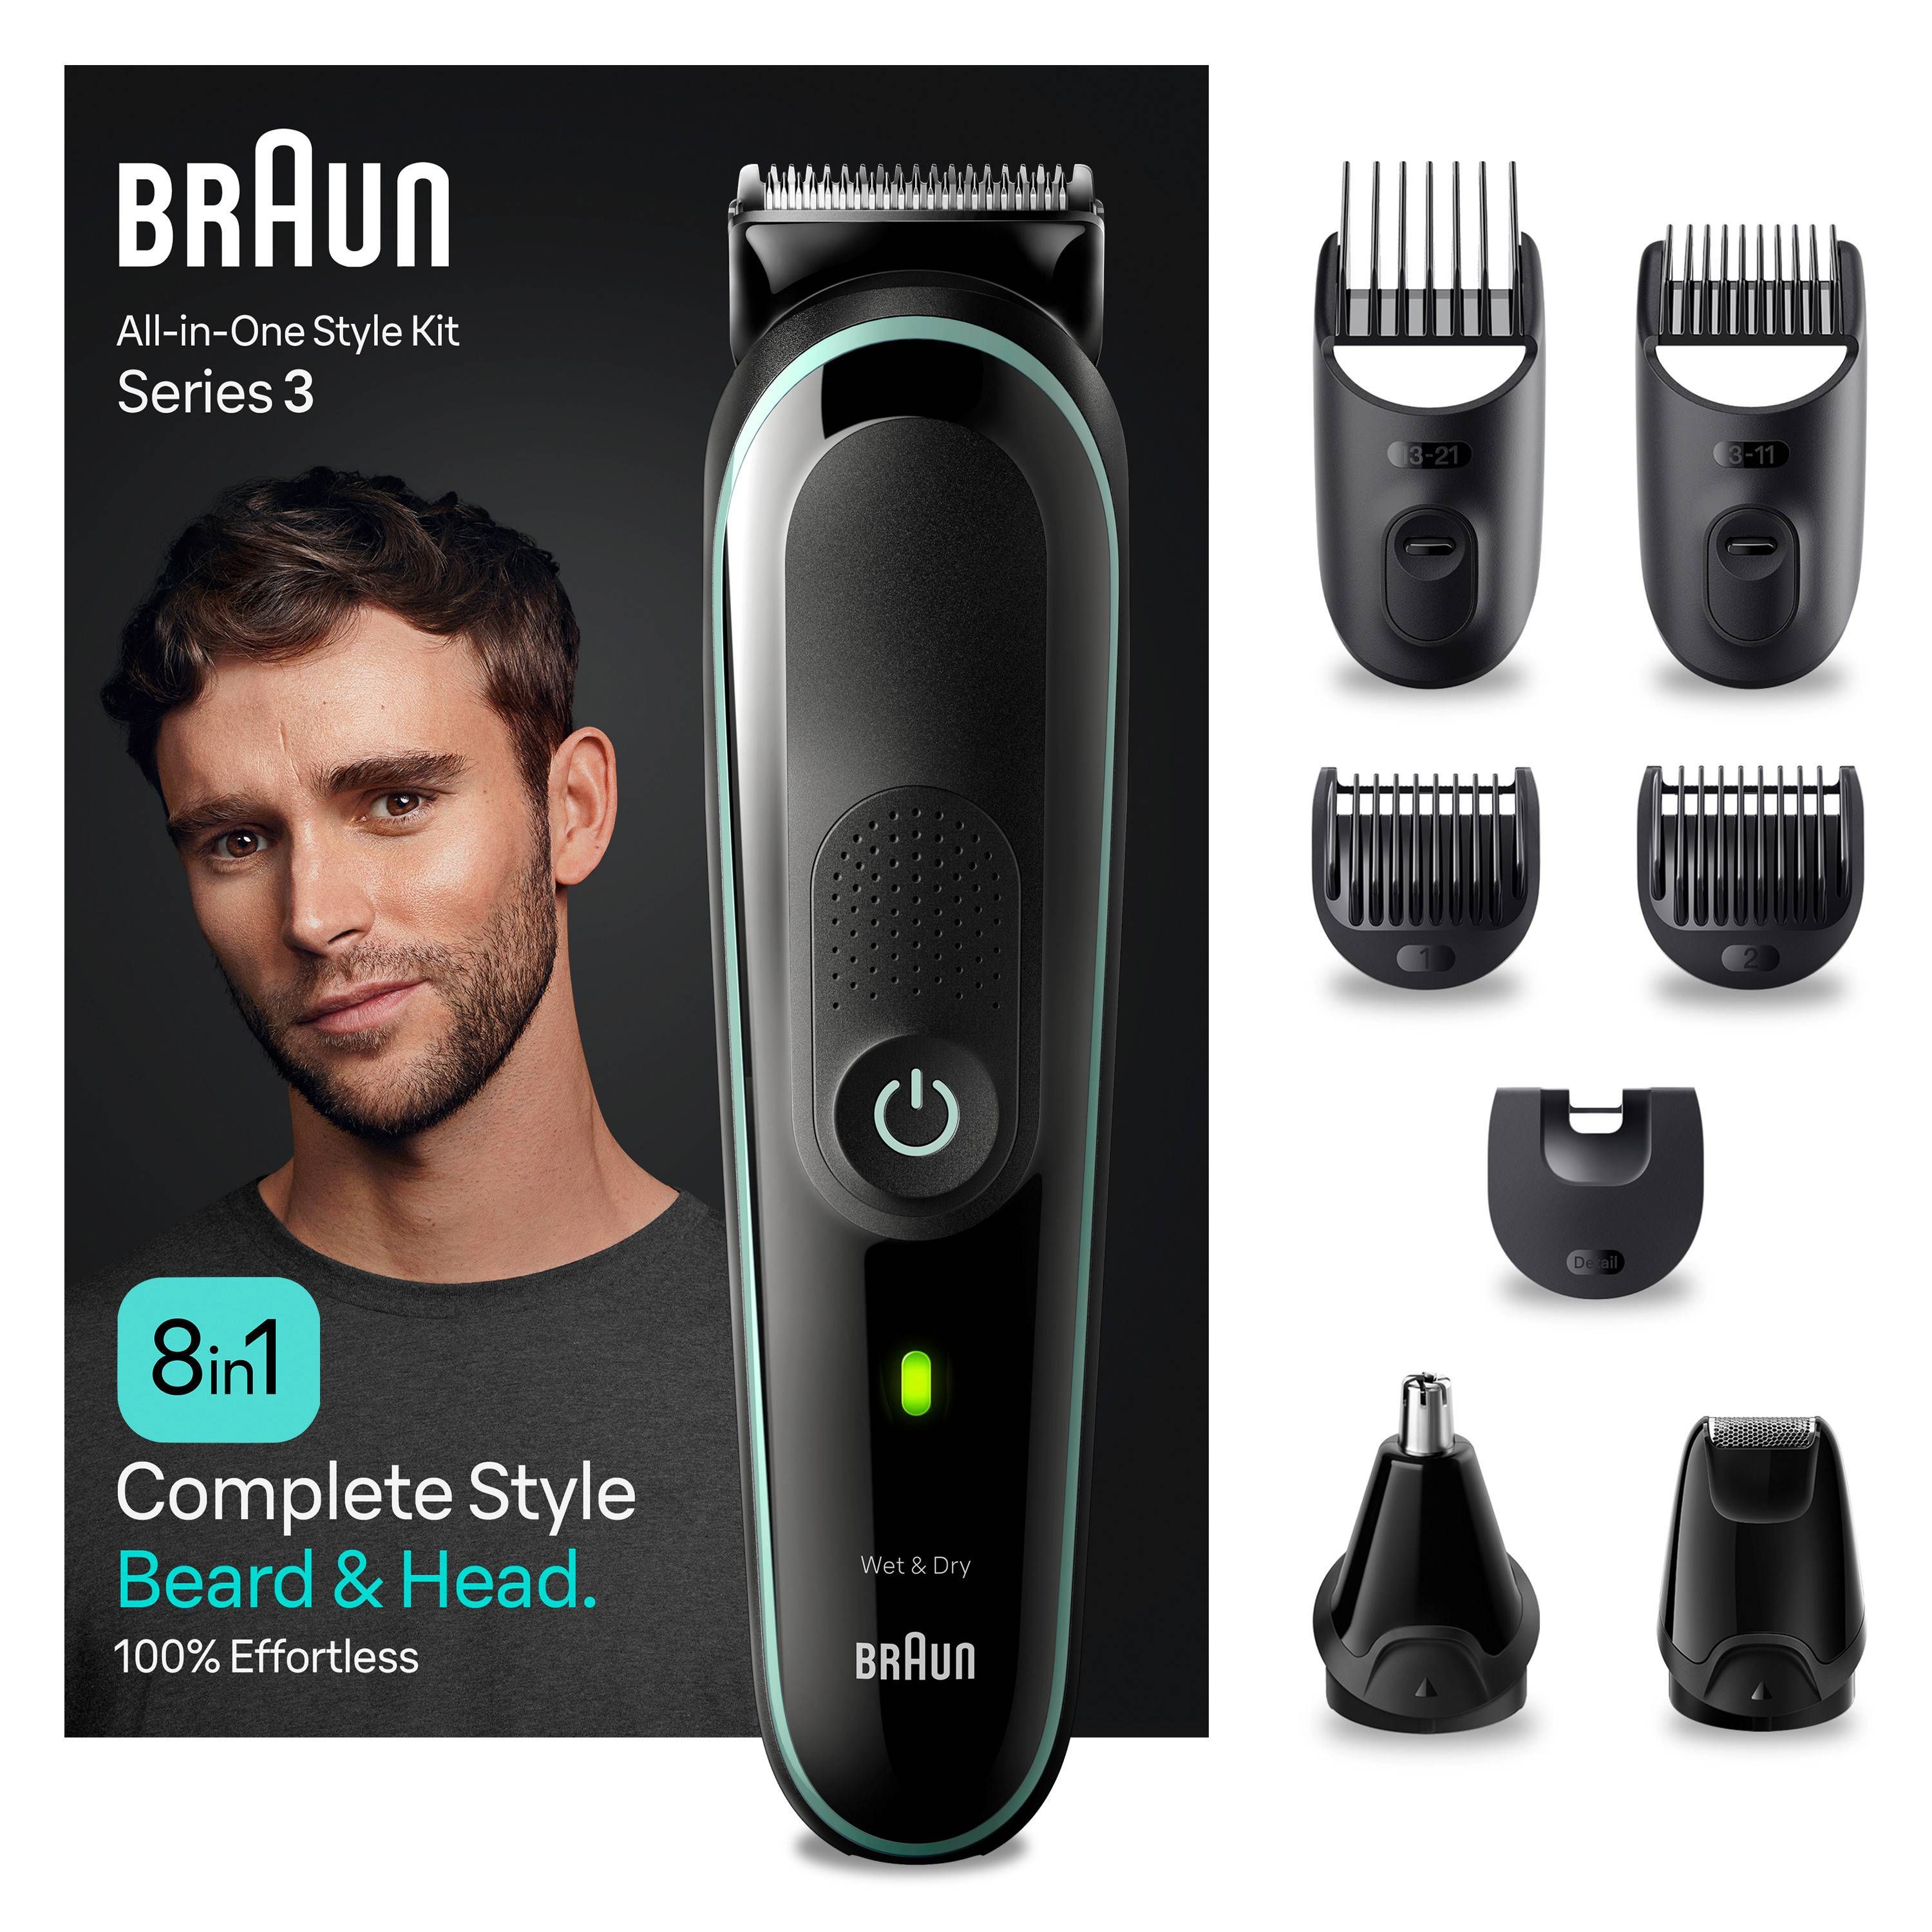 Braun All-in-One Style Kit 656656680 | MGK7450